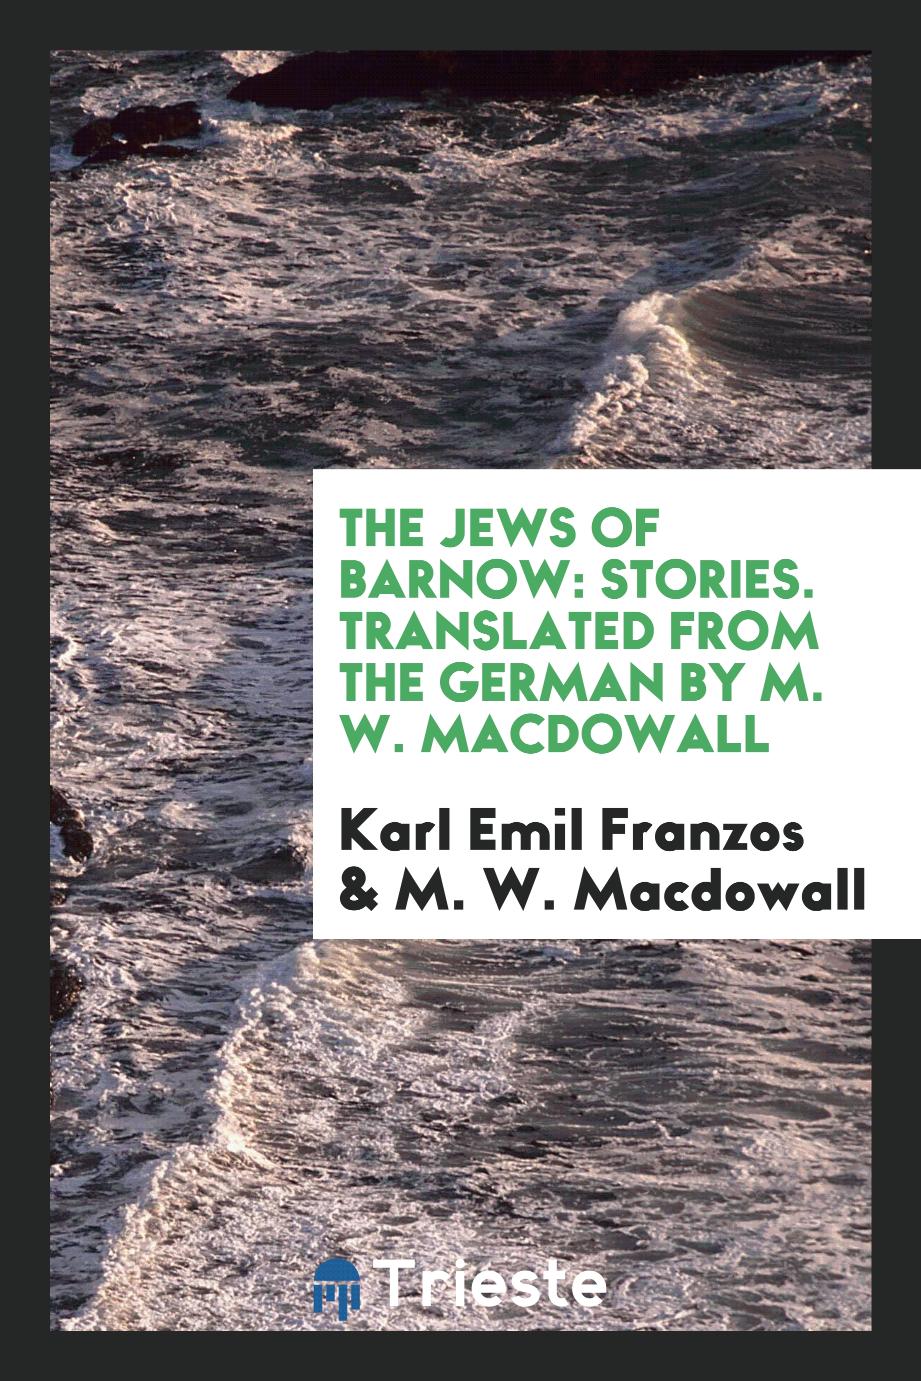 The Jews of Barnow: Stories. Translated from the German by M. W. Macdowall